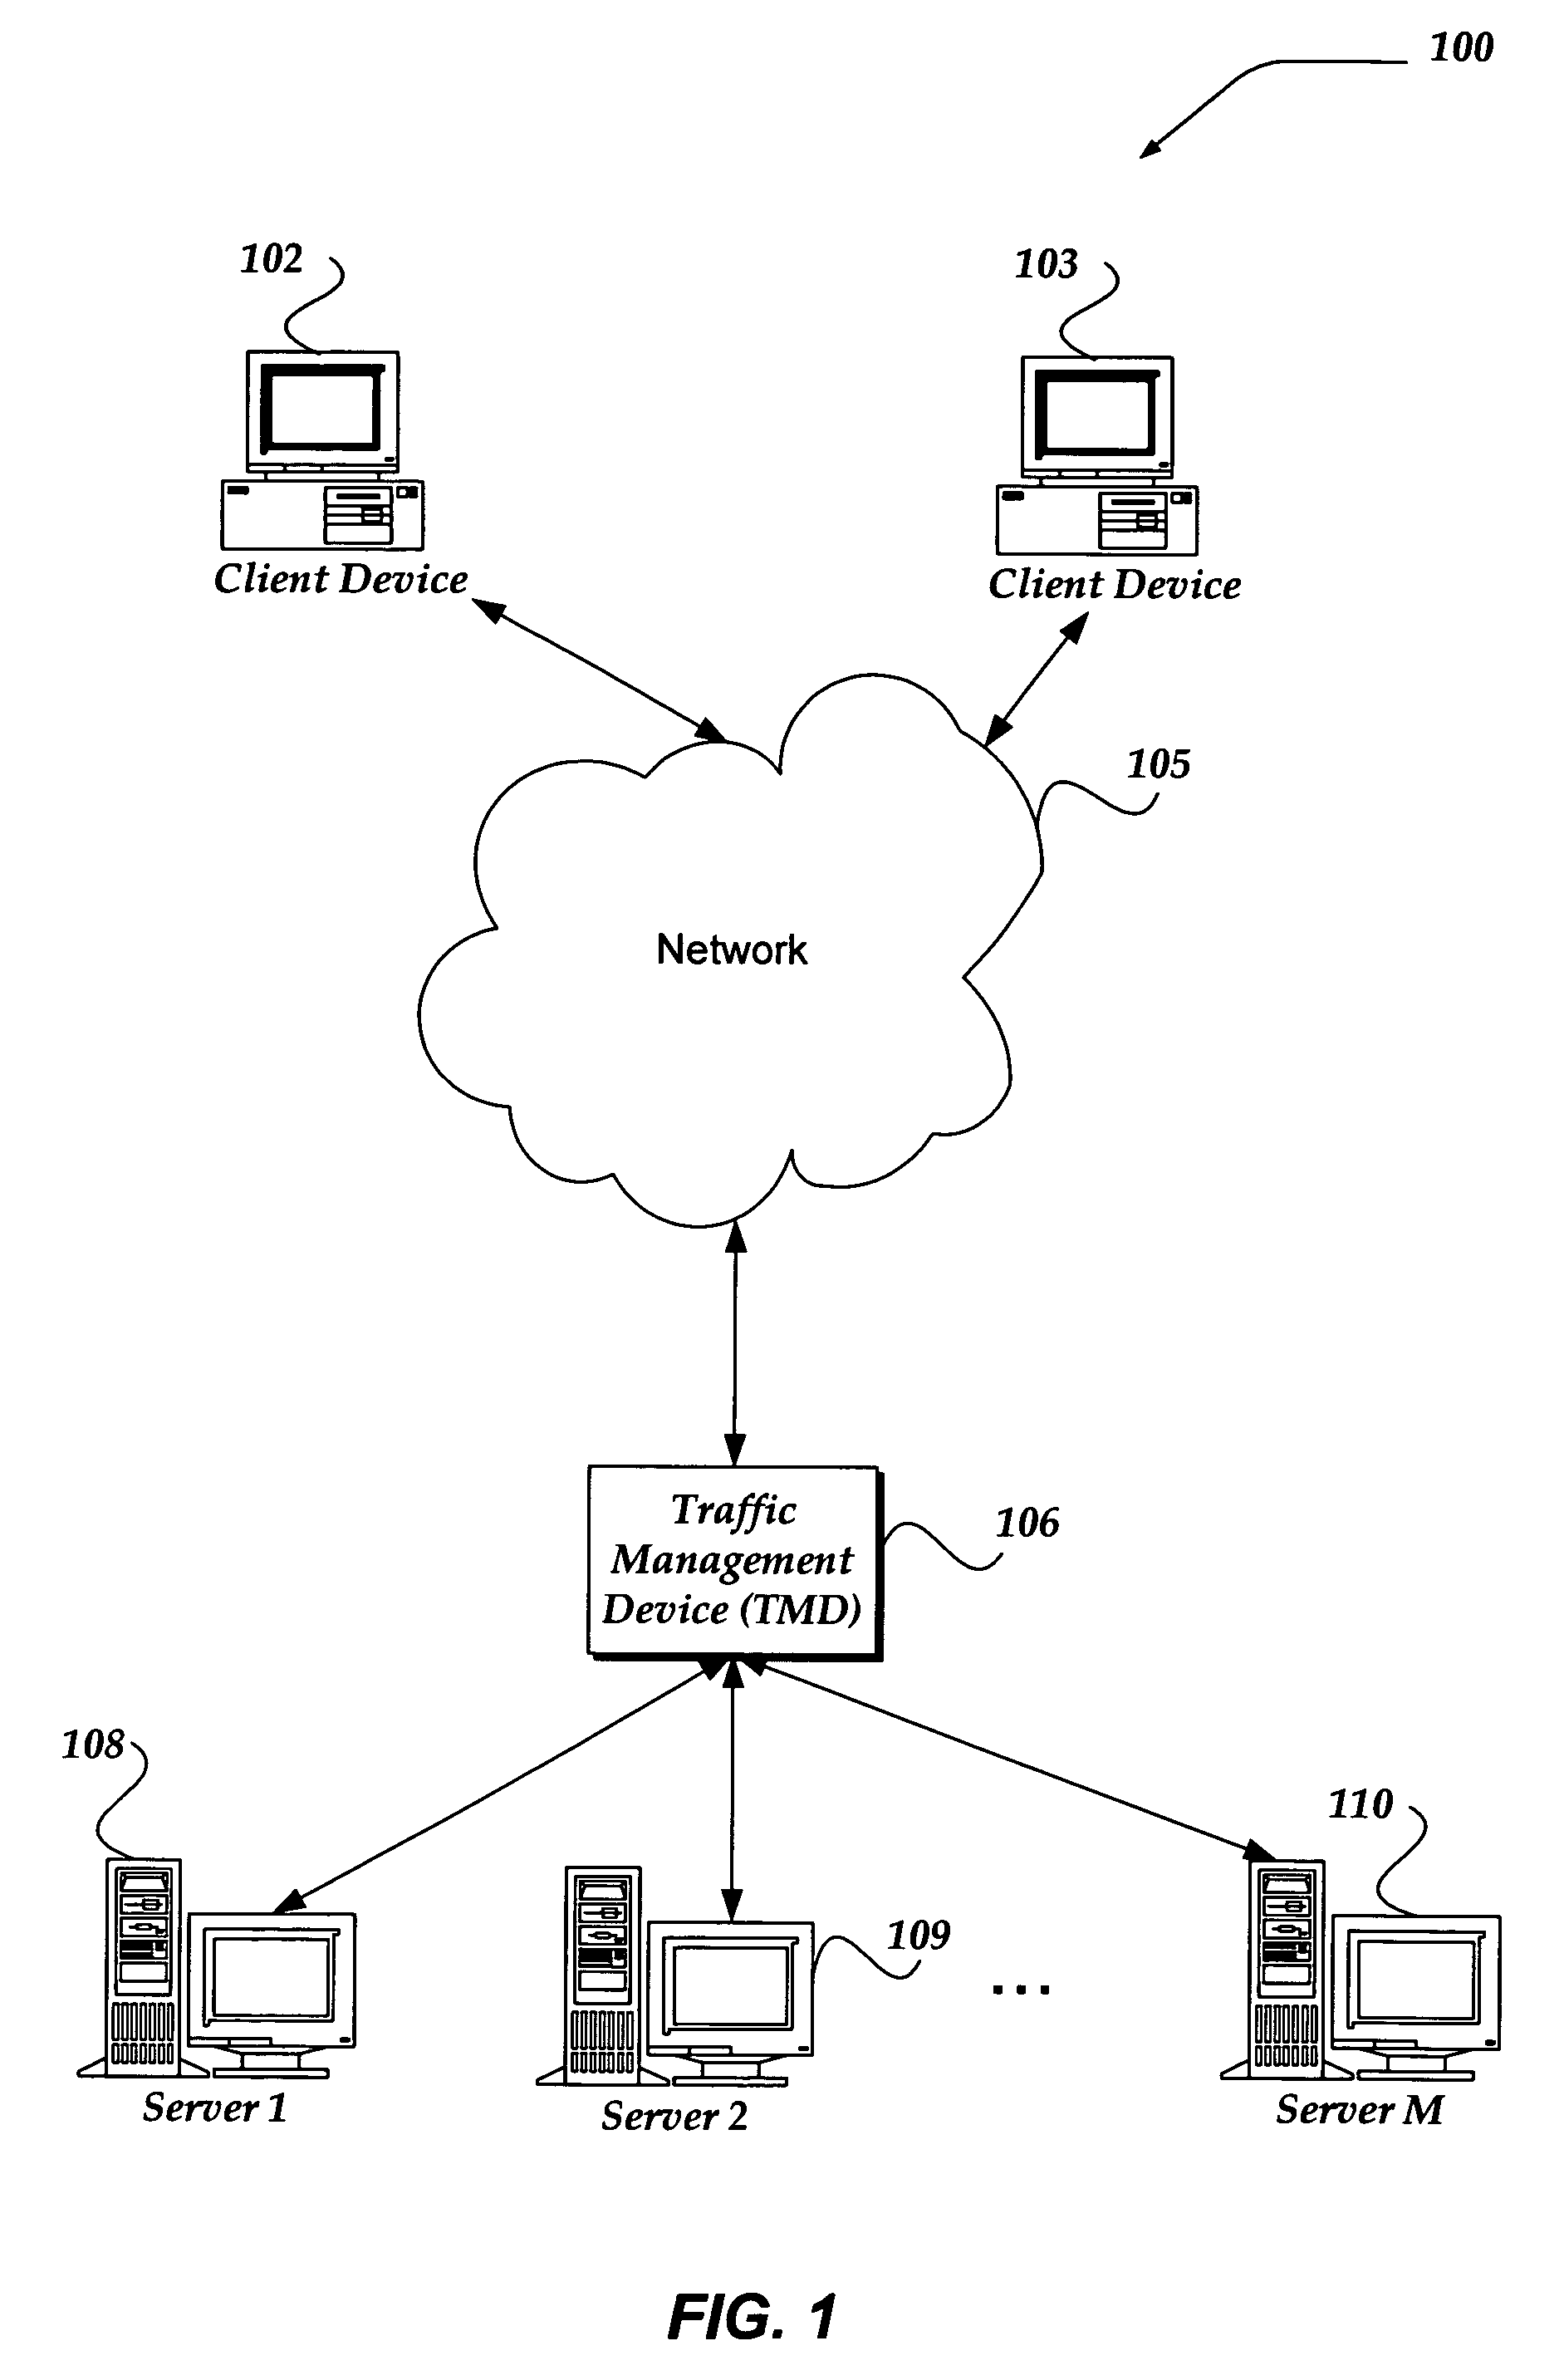 Coalescing acknowledgement responses to improve network communications